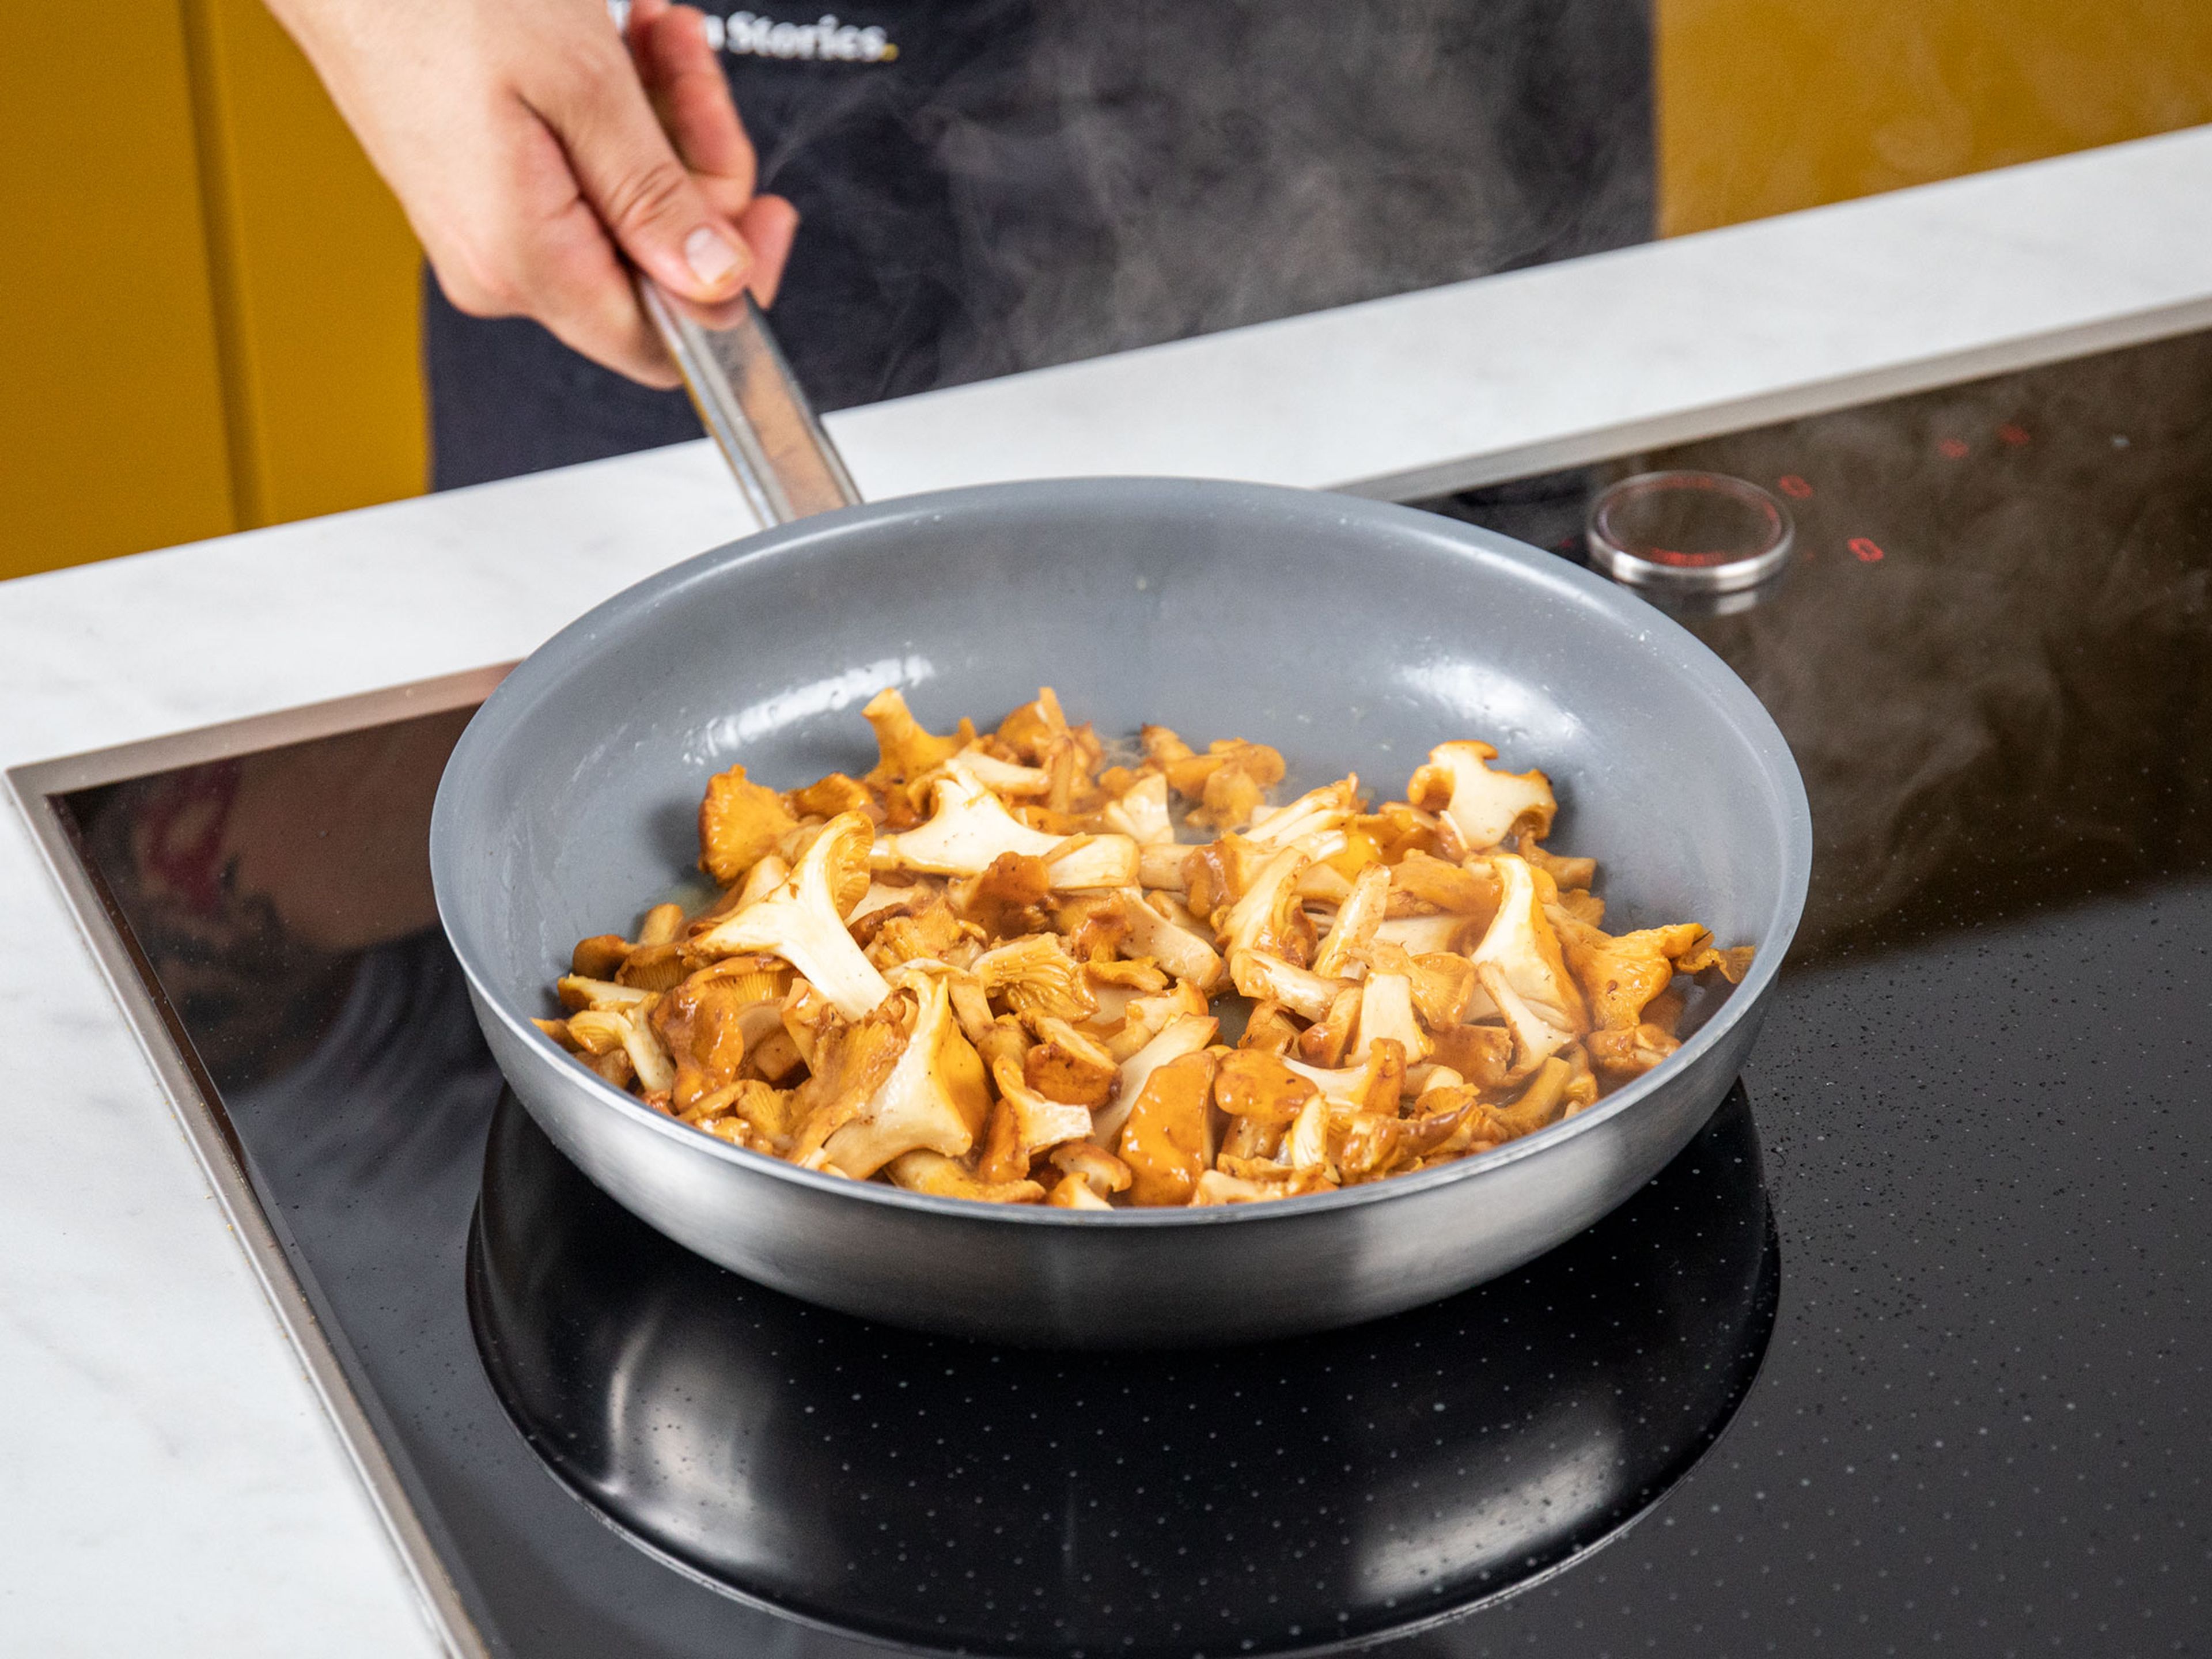 In the meantime, add butter to a frying pan over medium-high heat. Add chanterelle mushrooms and fry vigorously for approx. 8 min. Add onion, season with salt and pepper, and sauté until onion is tender, then remove from heat.